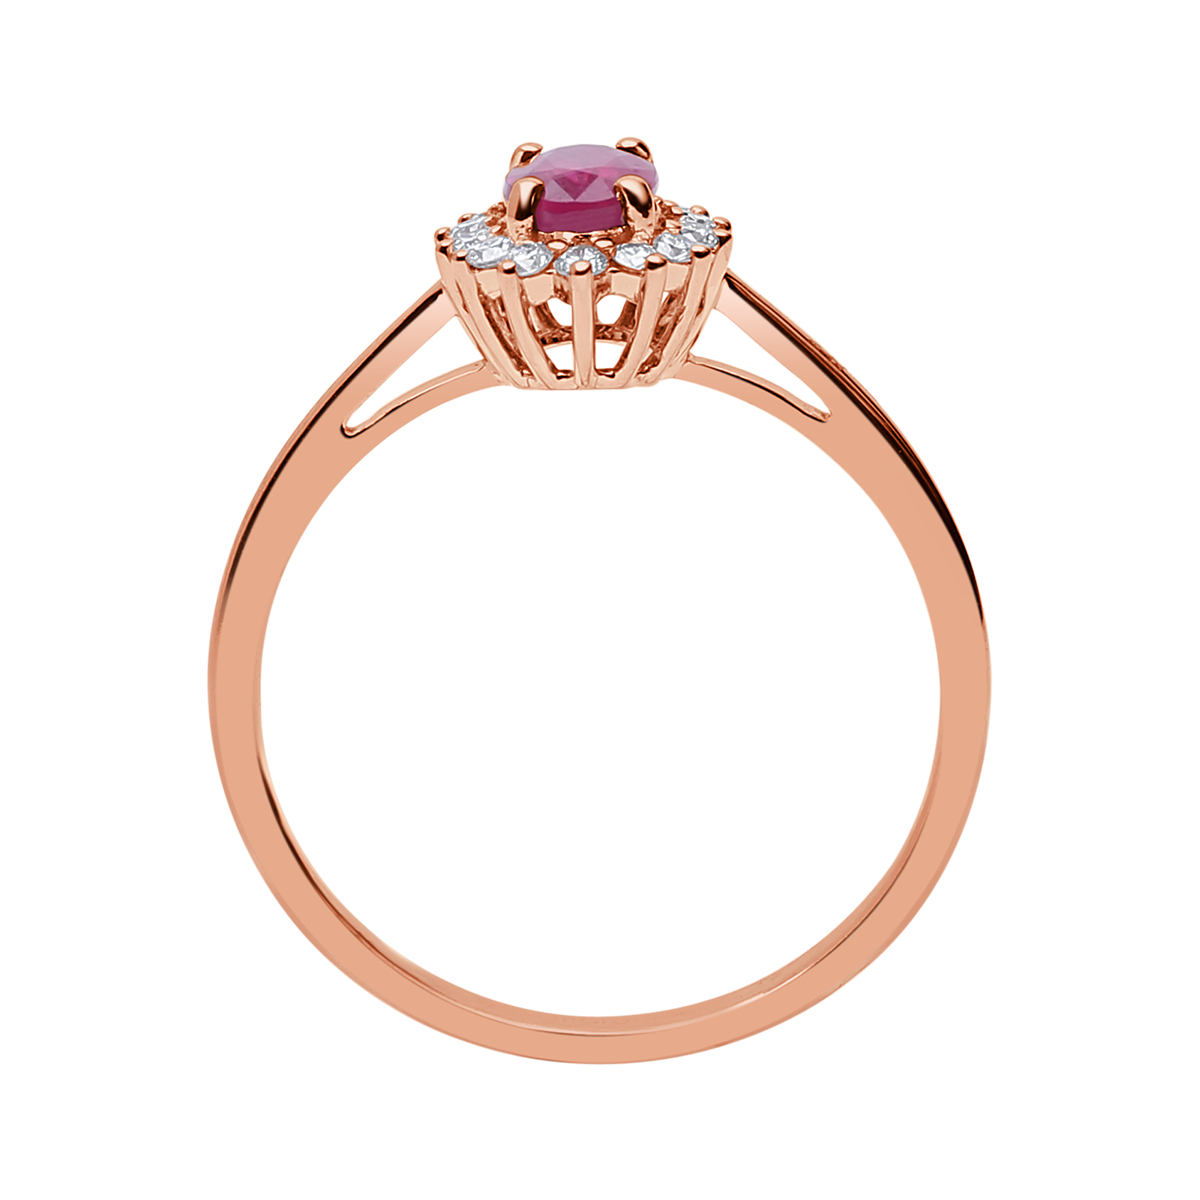 Oval Gemstone Diana Ring From Precious Collection